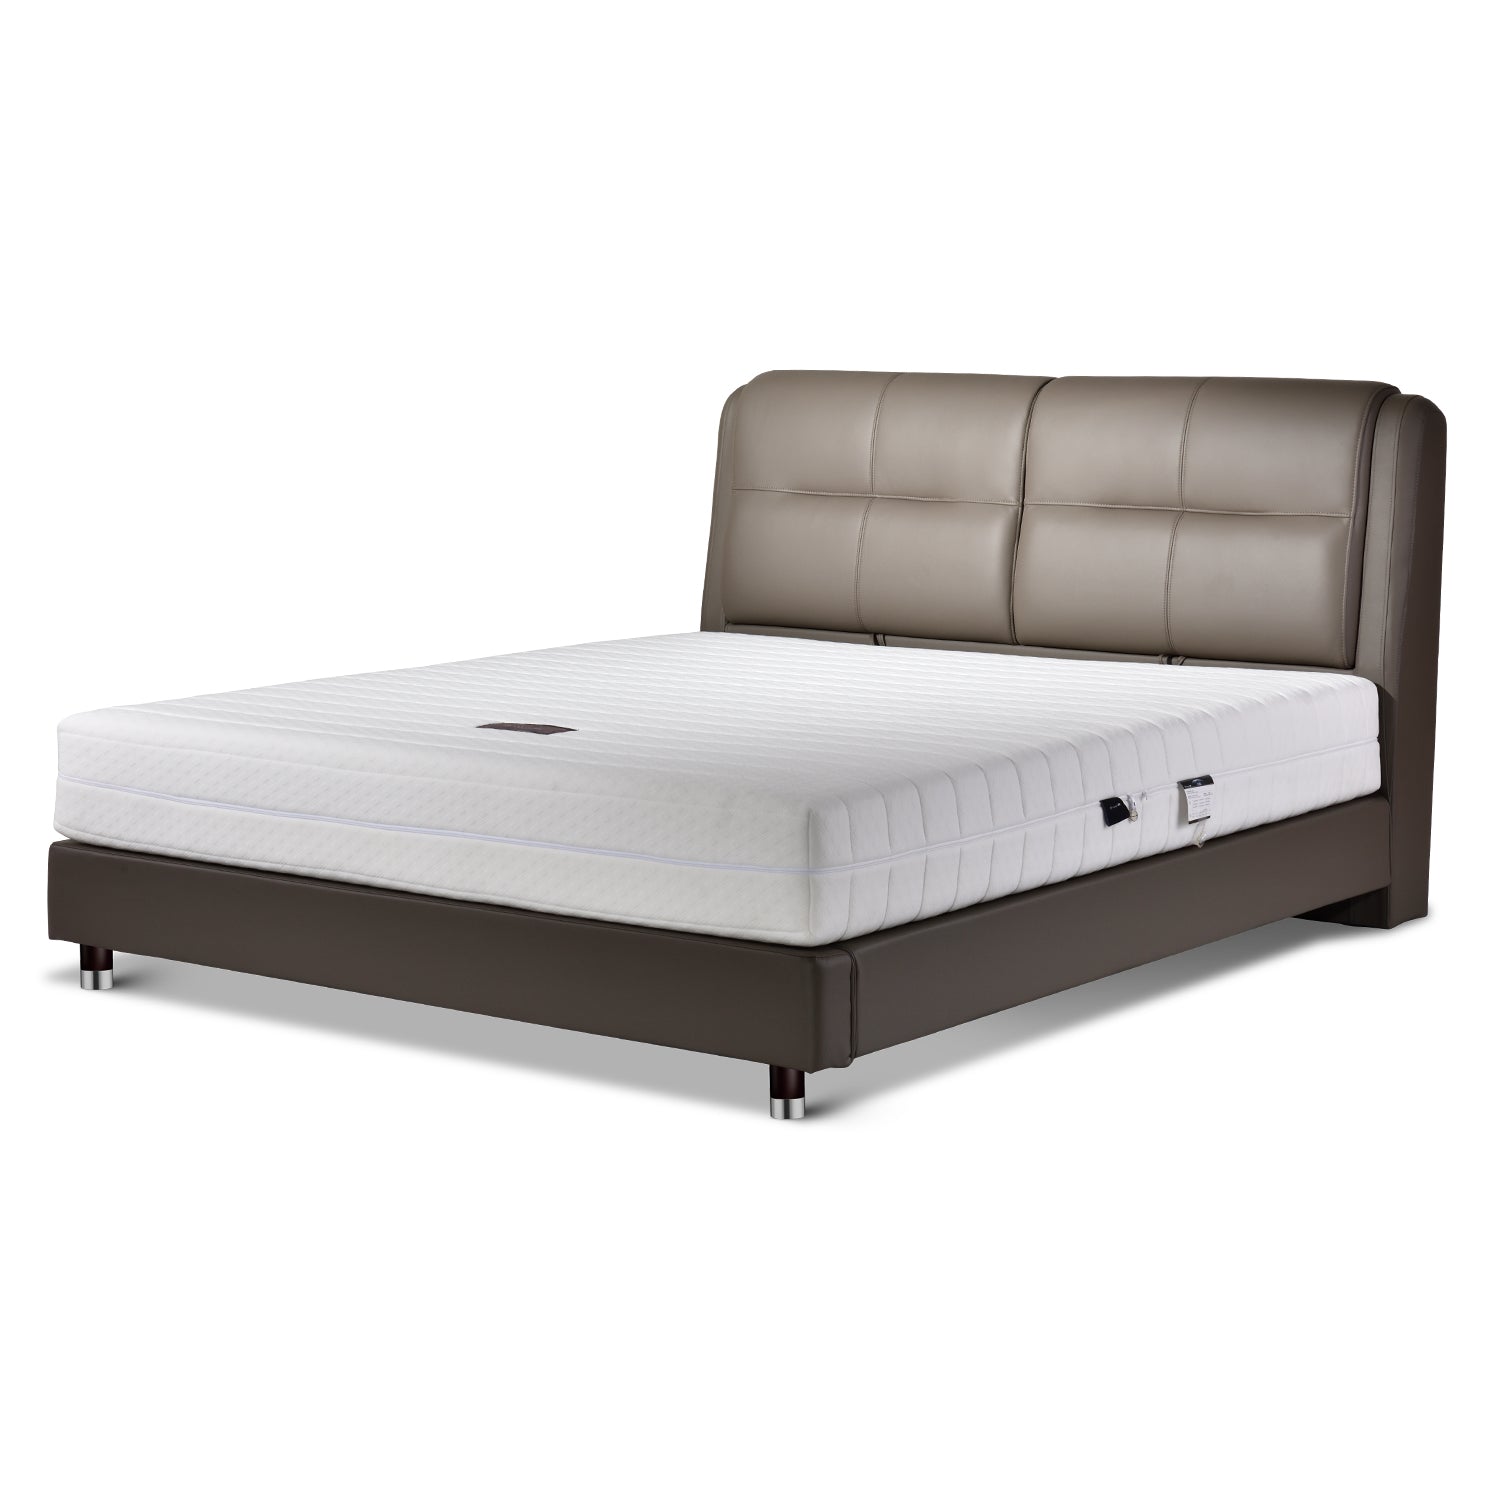 Brown leather bed frame with white mattress, minimalist design with clean lines and padded headboard, DeRUCCI bed frame BZZ4 - 243